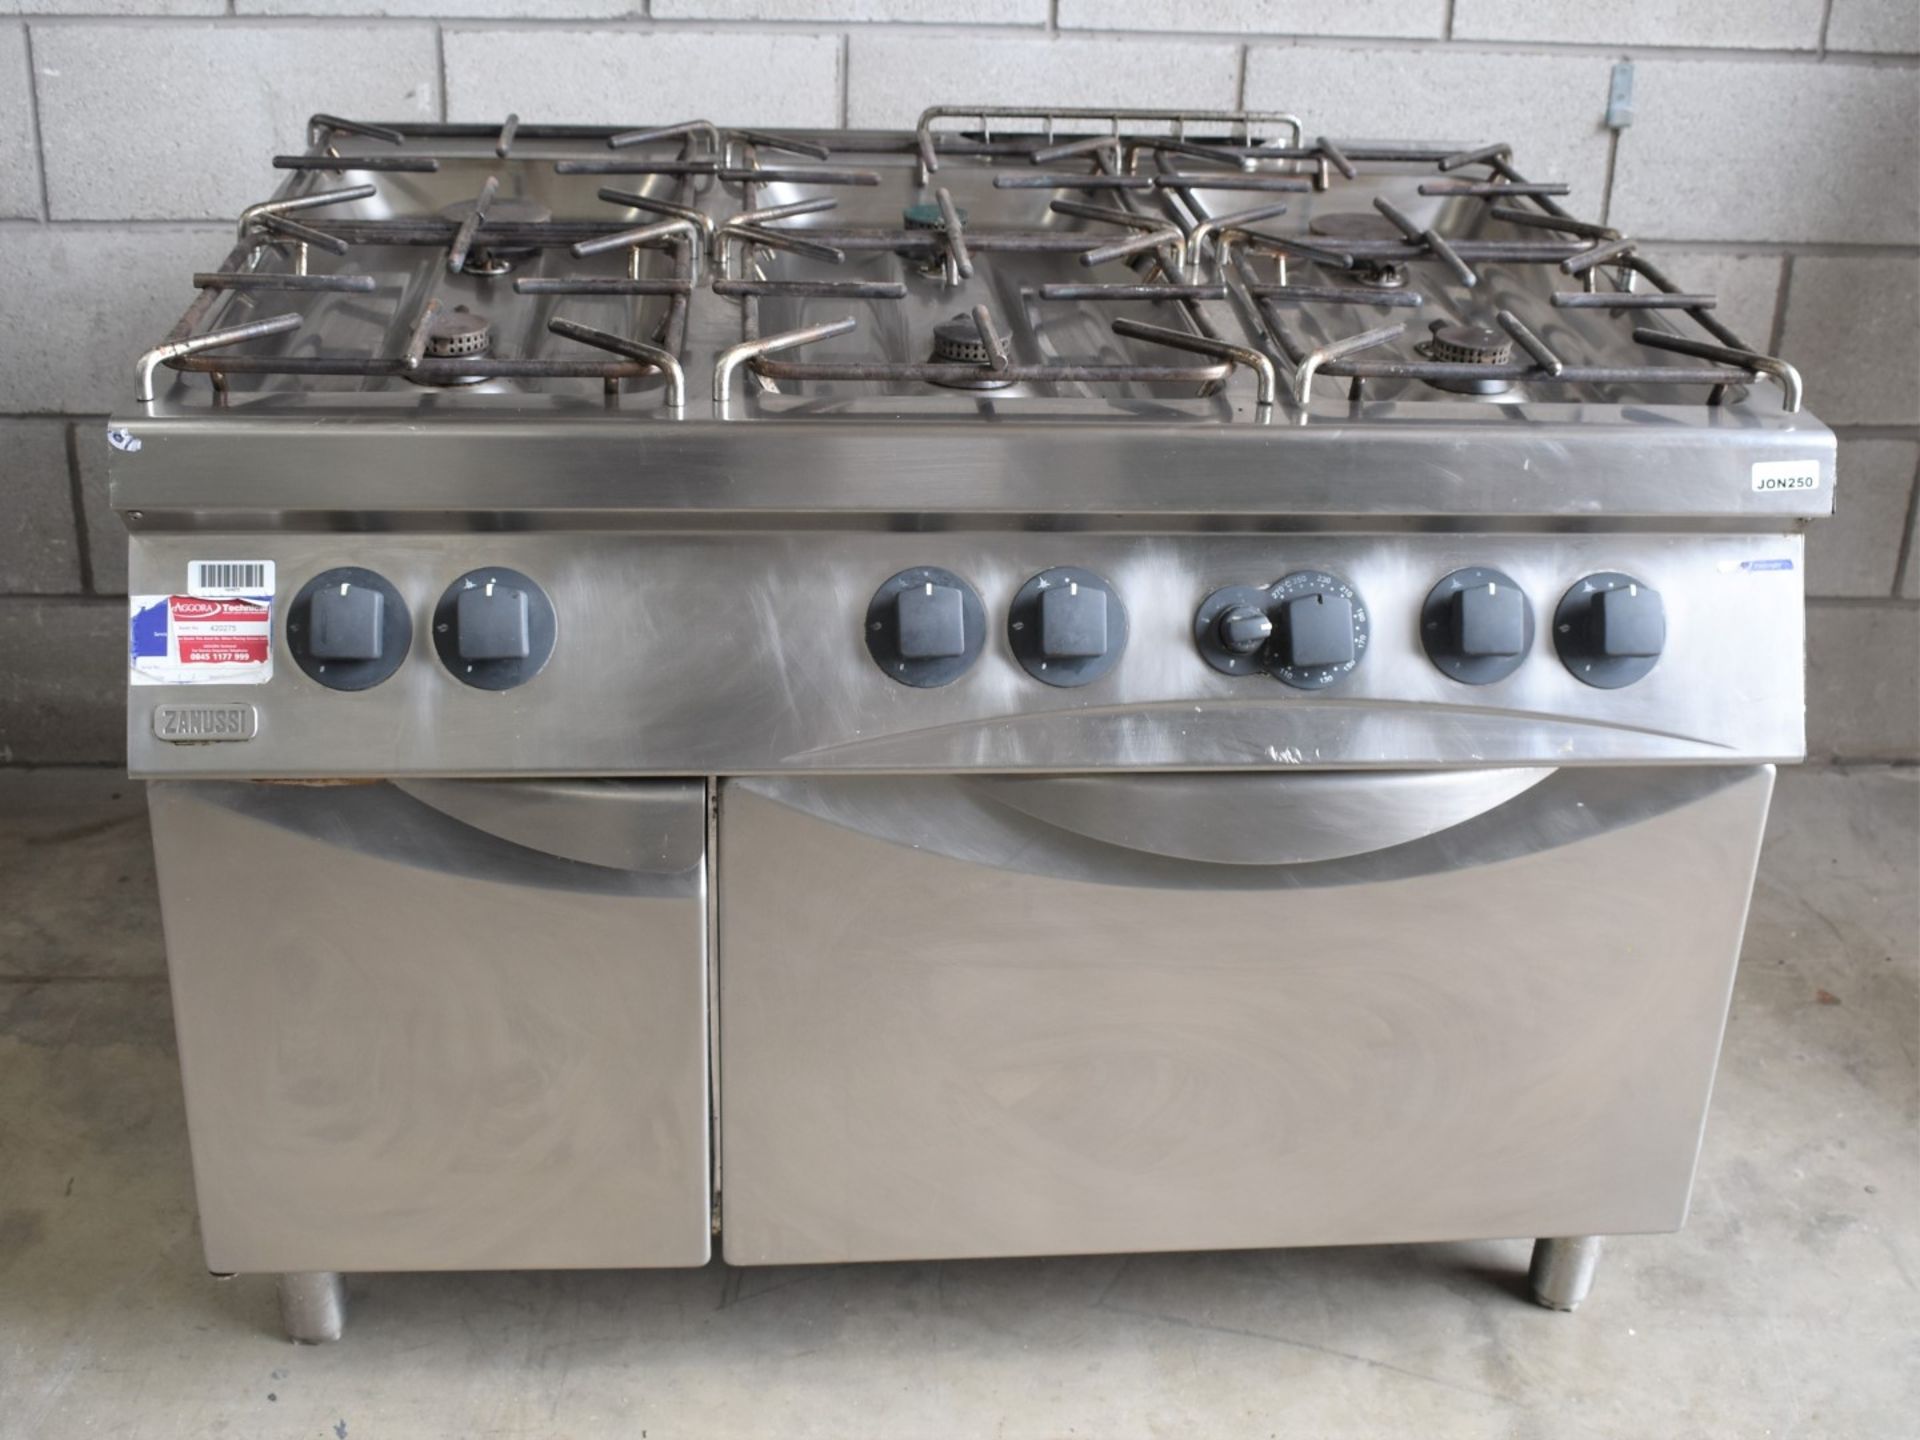 1 x Zanussi 6 Burner Gas Range Cooker with a Stainless Steel Exterior